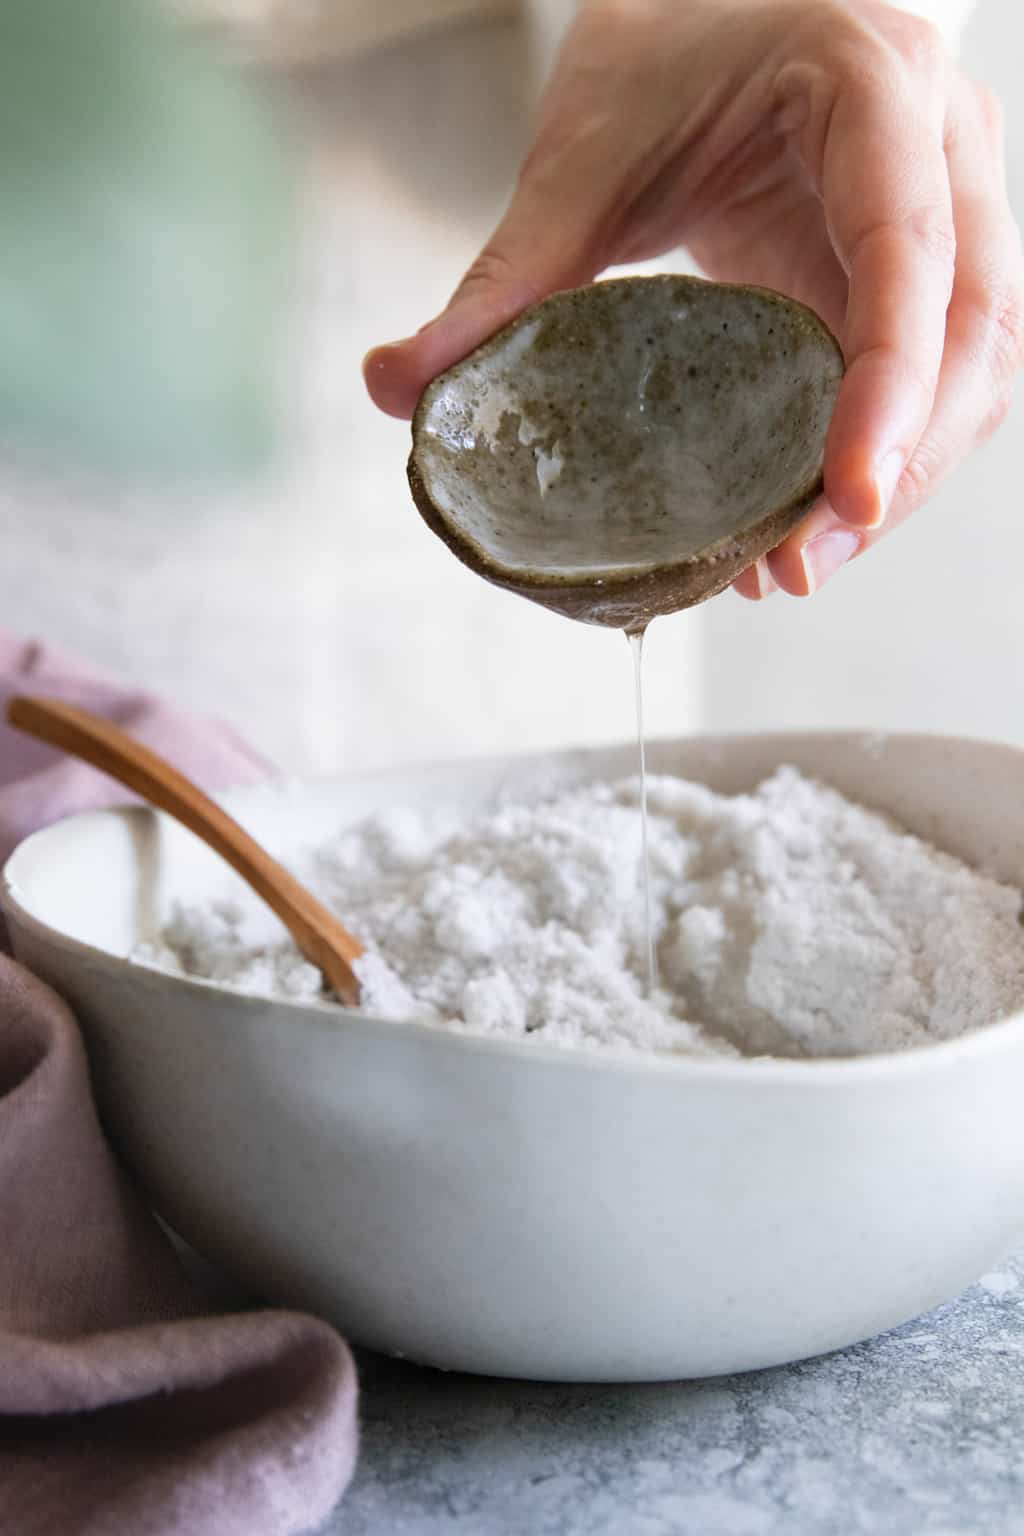 Coconut oil is the secret ingredient to perfect homemade bath bombs